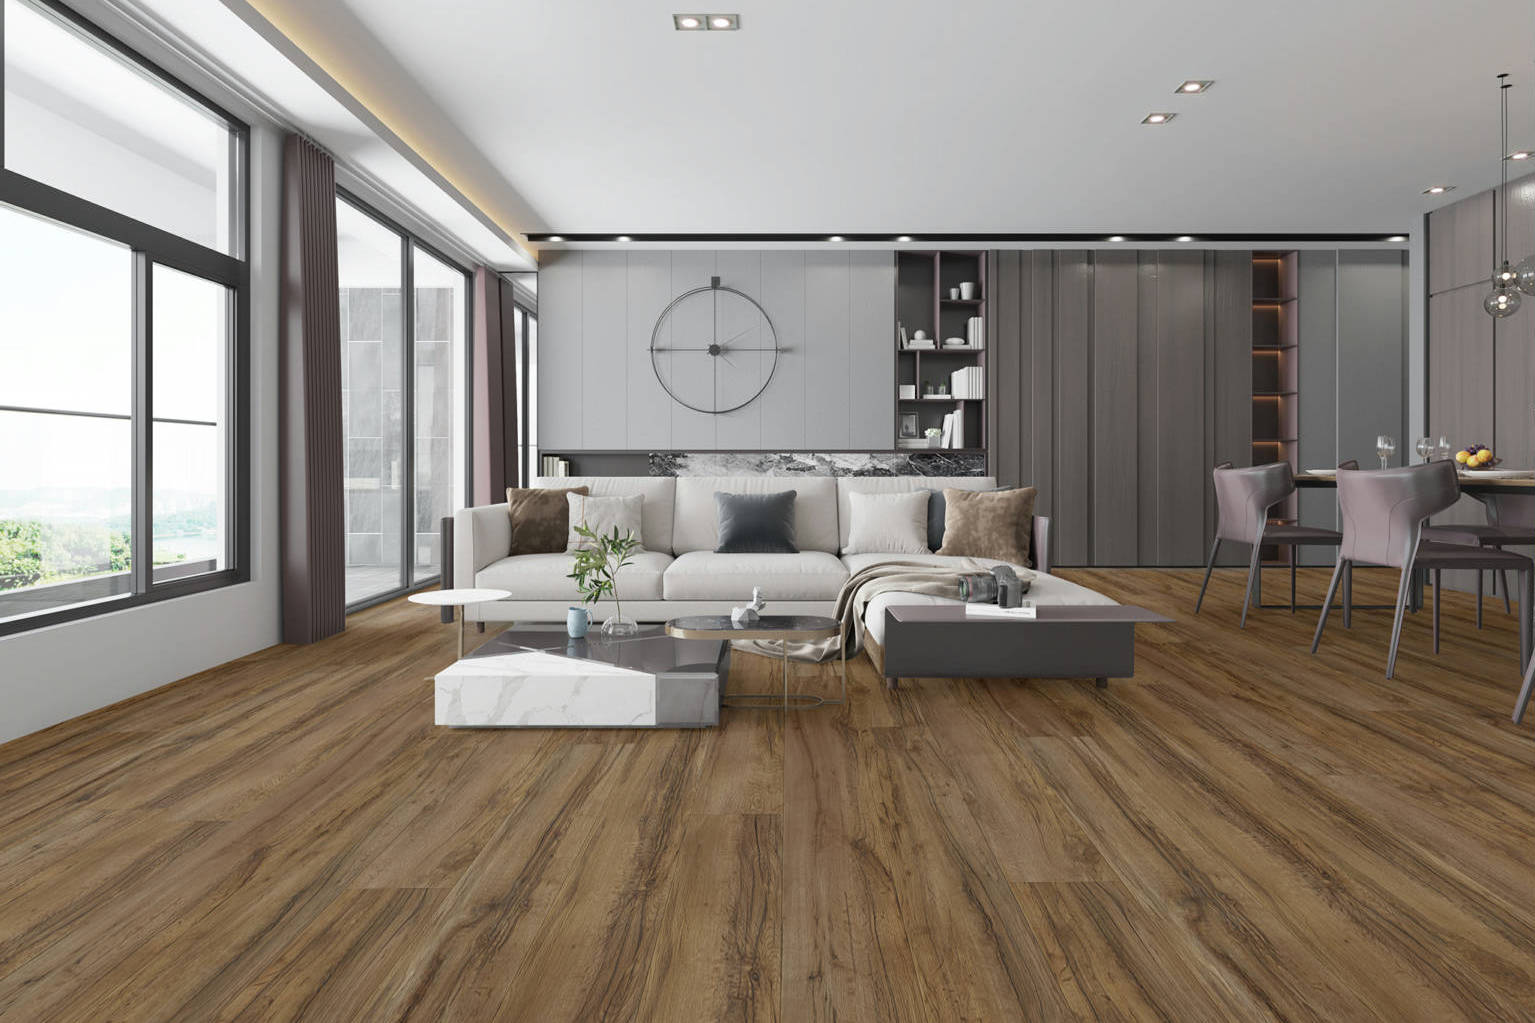 Timber Ridge Gold 20 4 | Qualis Ceramica | Luxury Tile and Vinyl at affordable prices